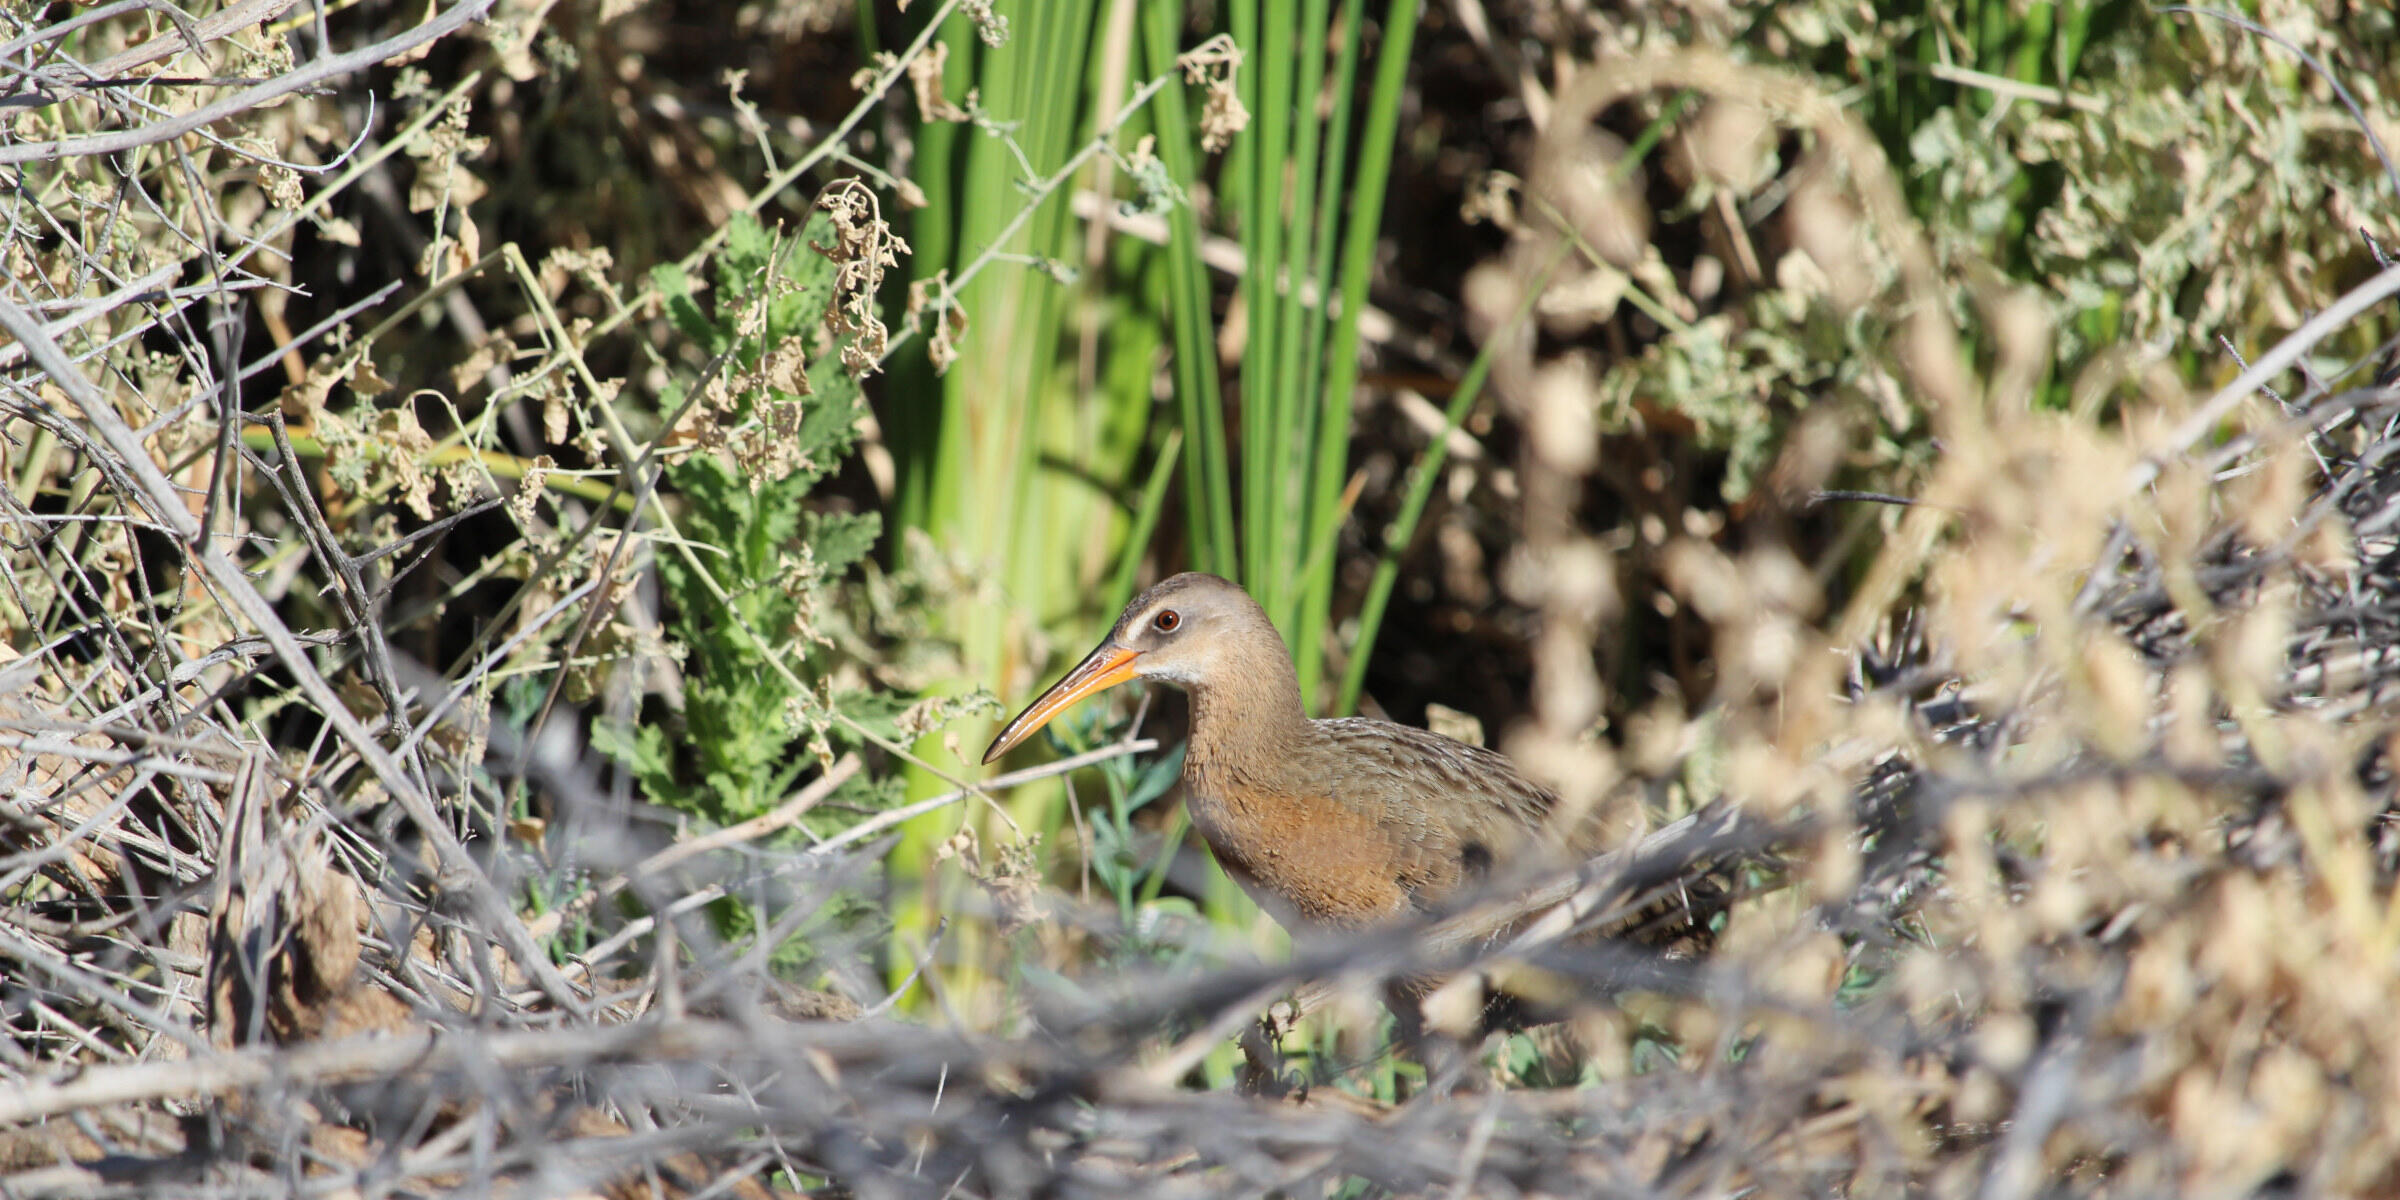 A Yuma Ridgway's Rail, a brown marsh bird with a long orange beak, stands partially obscured within dense vegetation.